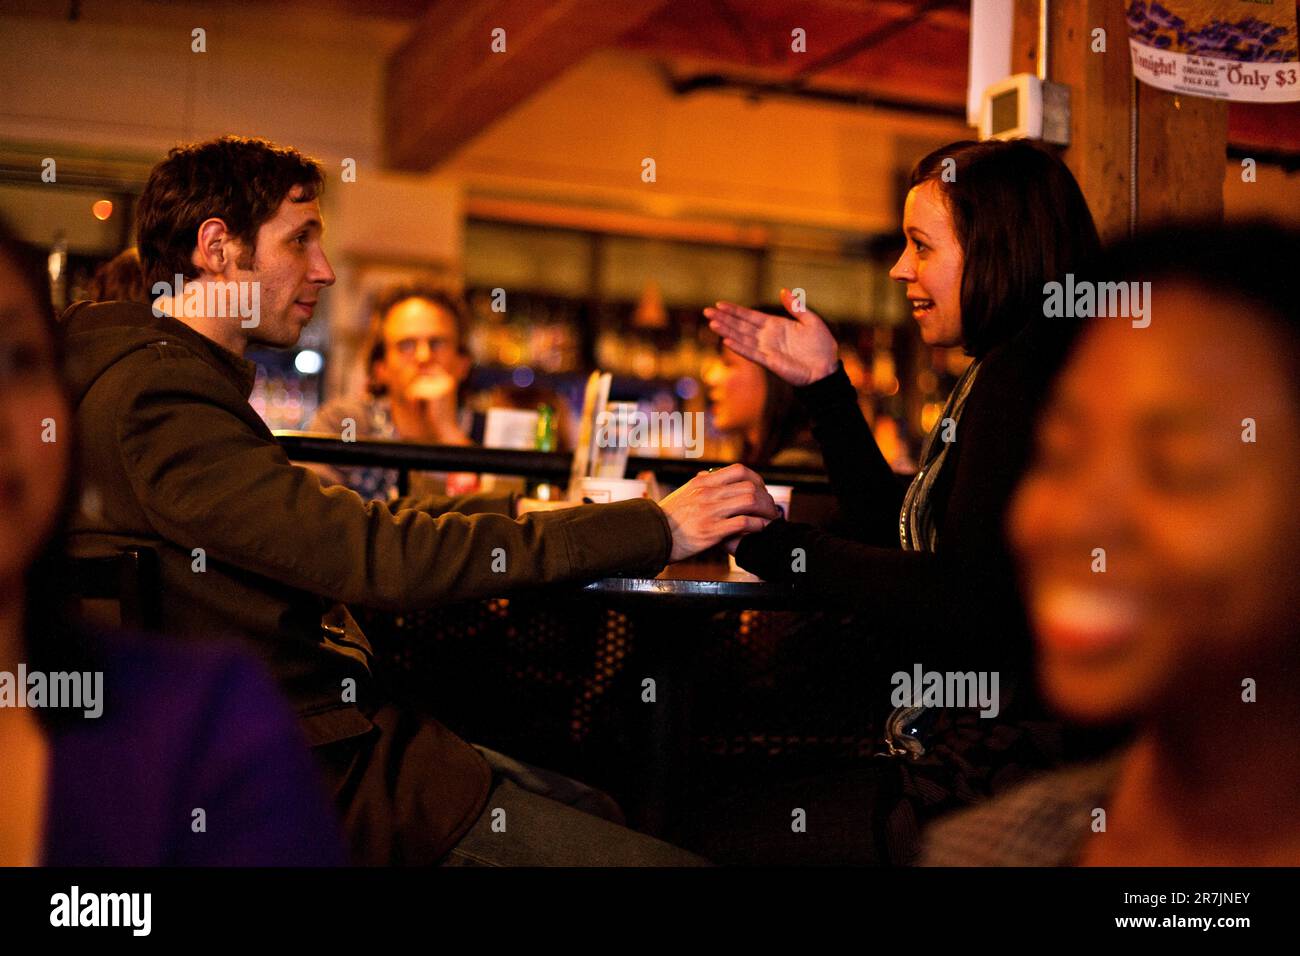 A young stylish man holds a woman's hand during a conversation in a bar in Seattle, Washington. Stock Photo